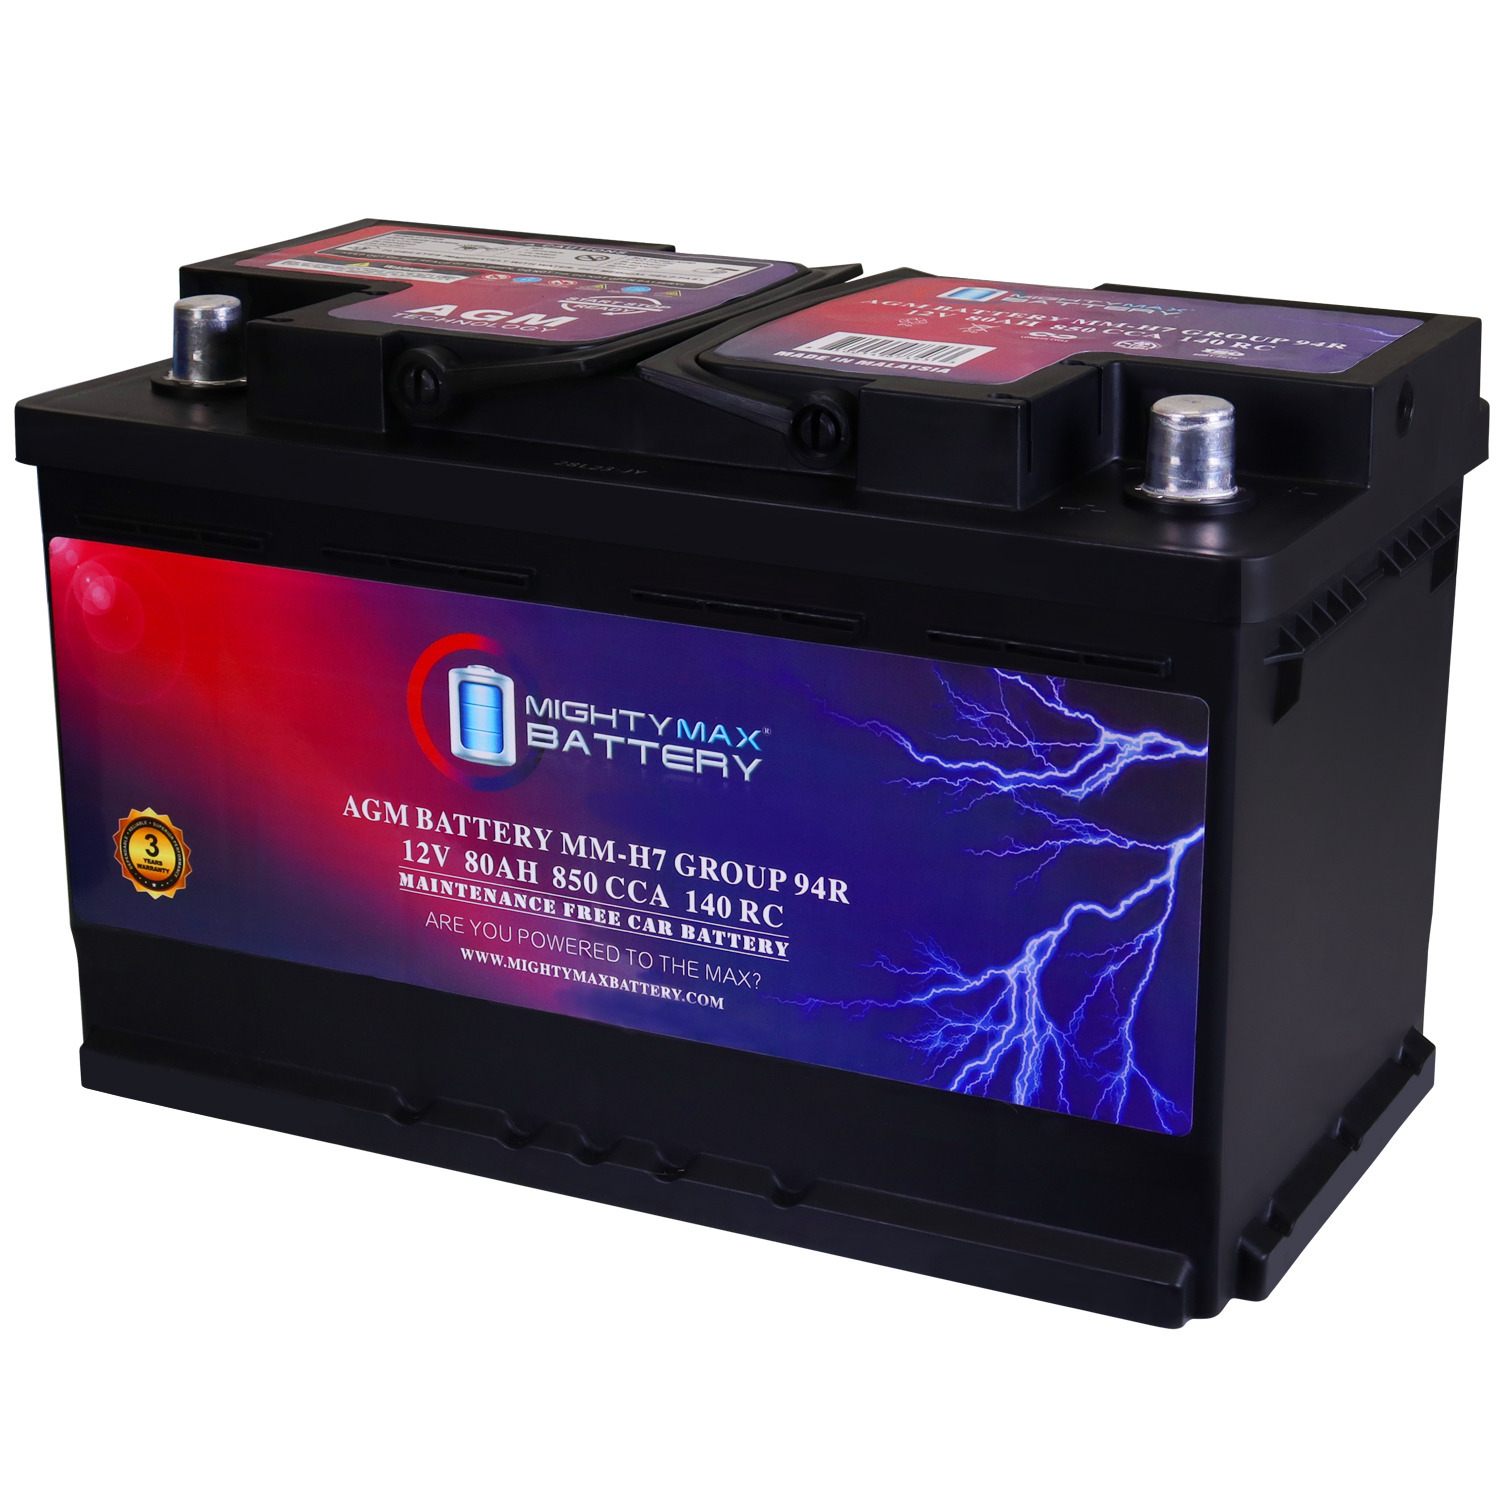 MM-H7 Group 94R 12V 80AH 140RC 850 CCA Replacement Battery Compatible with Alfa Romeo 147 (Non-US/Canada) 07